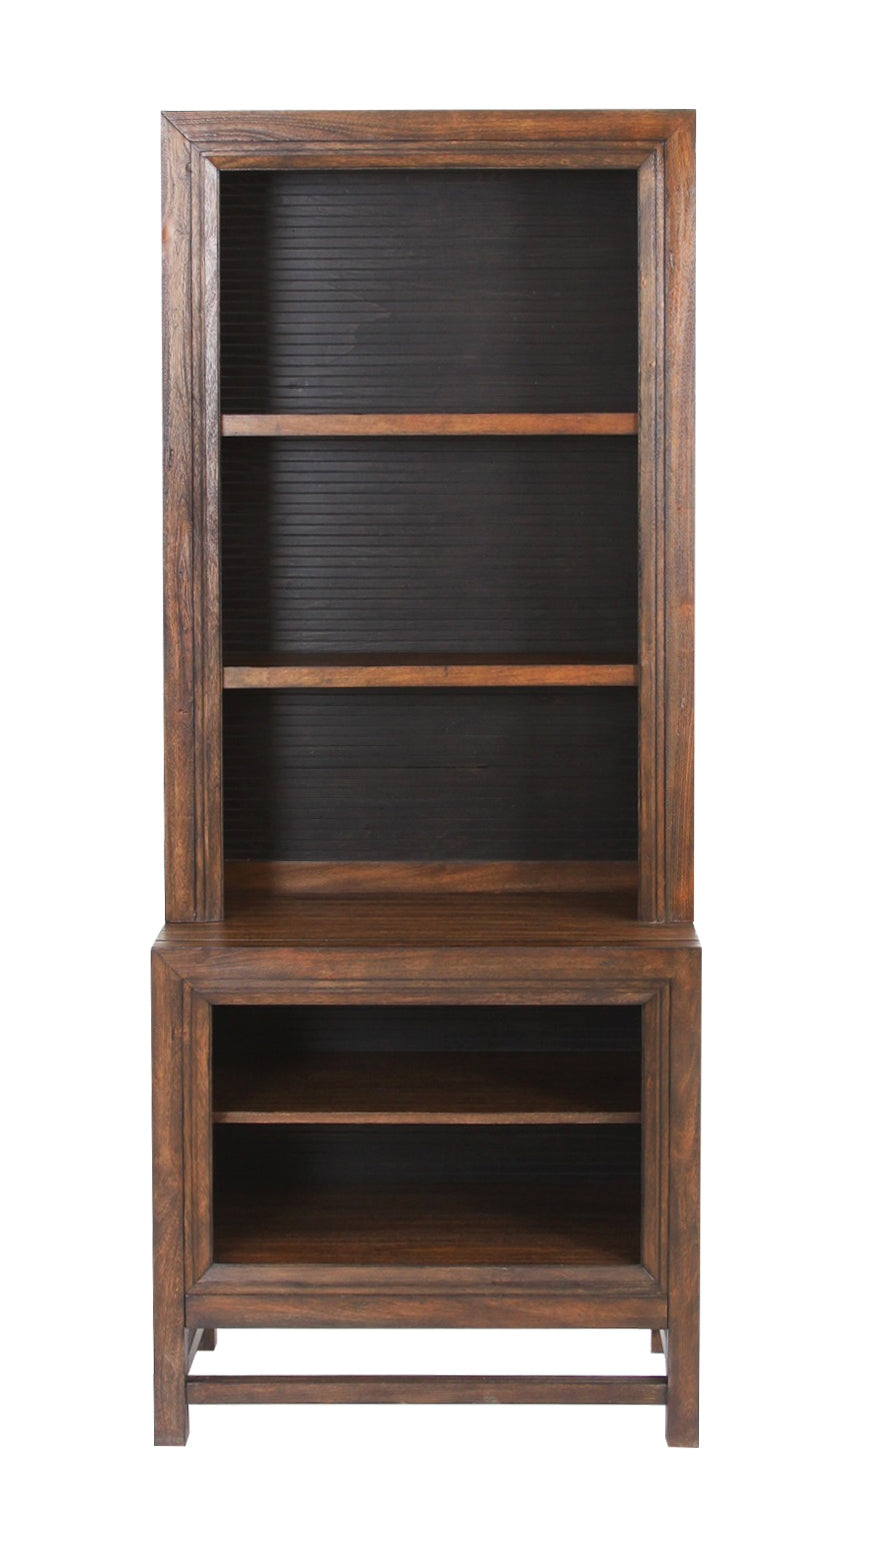 TM-Home-Branson-Bookcase-Pier,--Two-Tone-Finish-Bookcases-&-Standing-Shelves